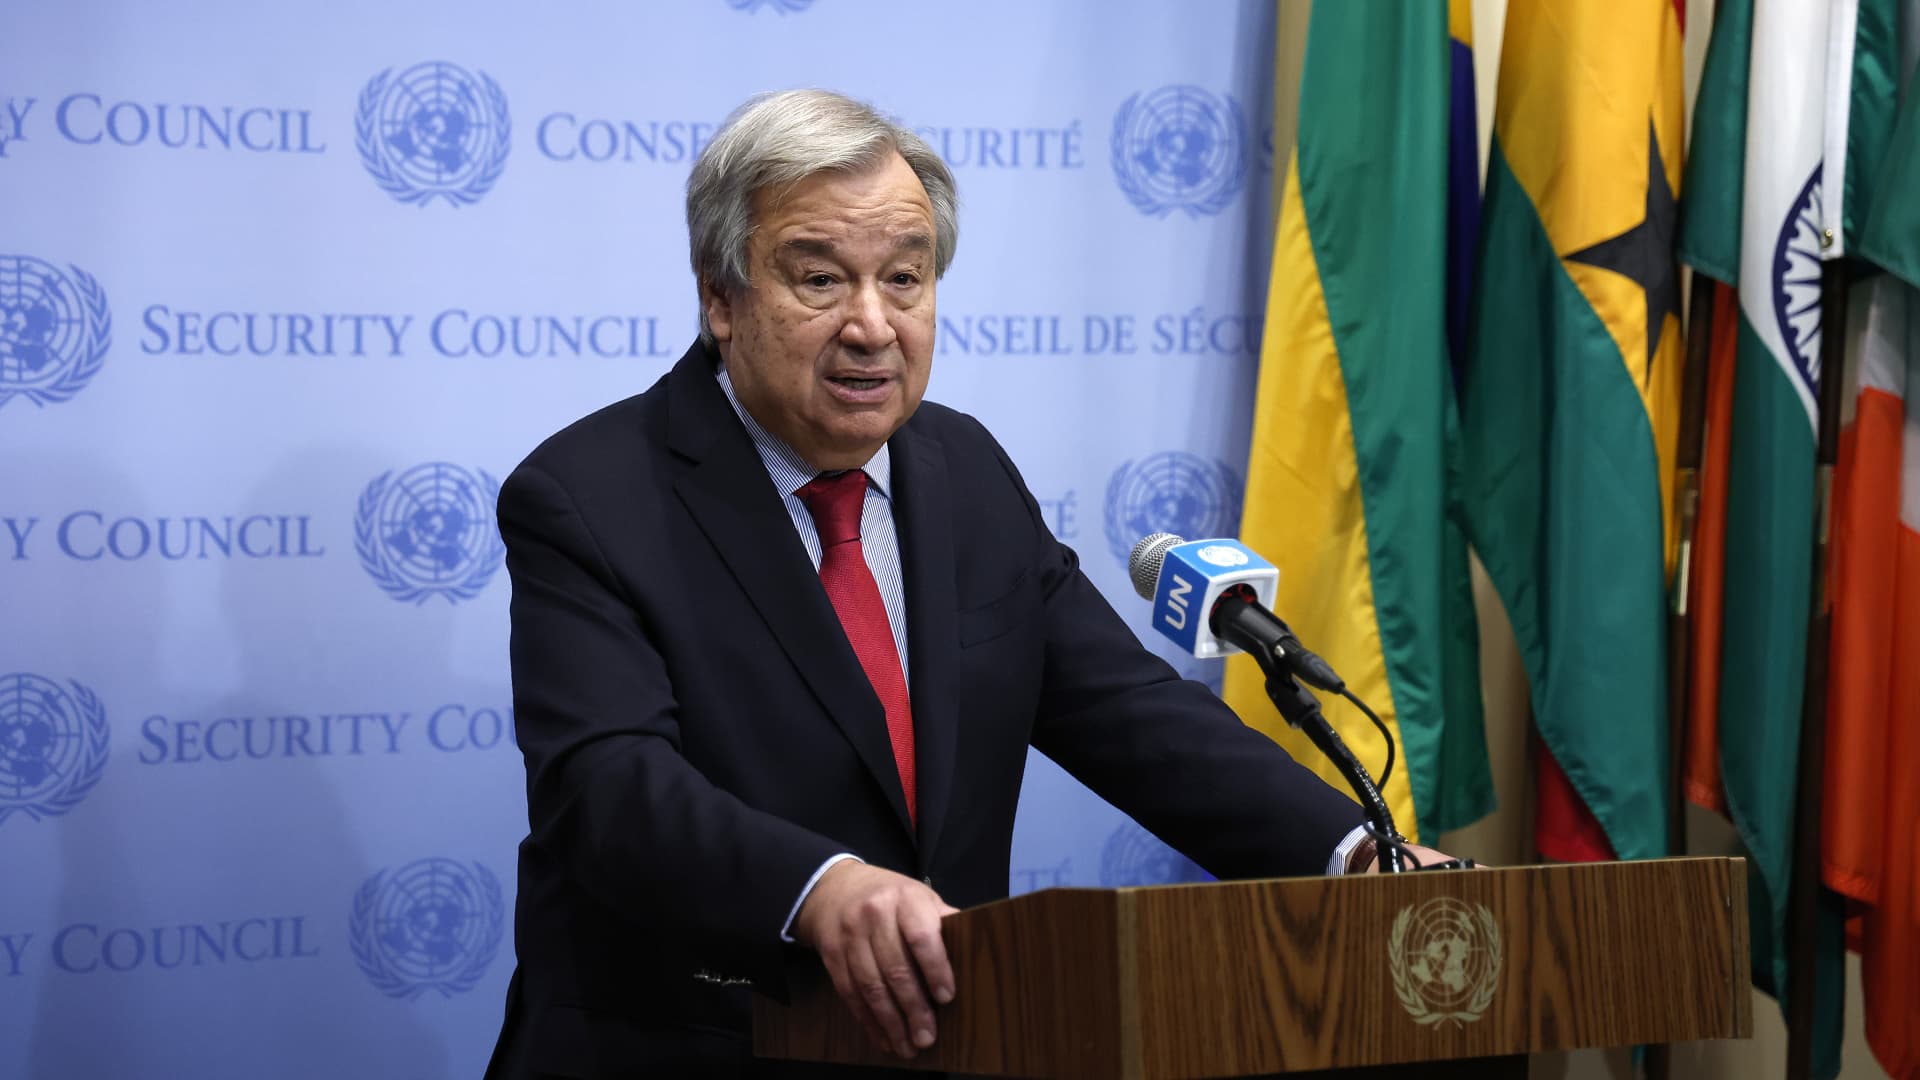 UN Secretary General Antonio Guterres speaks to the press about the current hostilities in Ethiopia at the United Nations headquarters on October 17, 2022 in New York City.